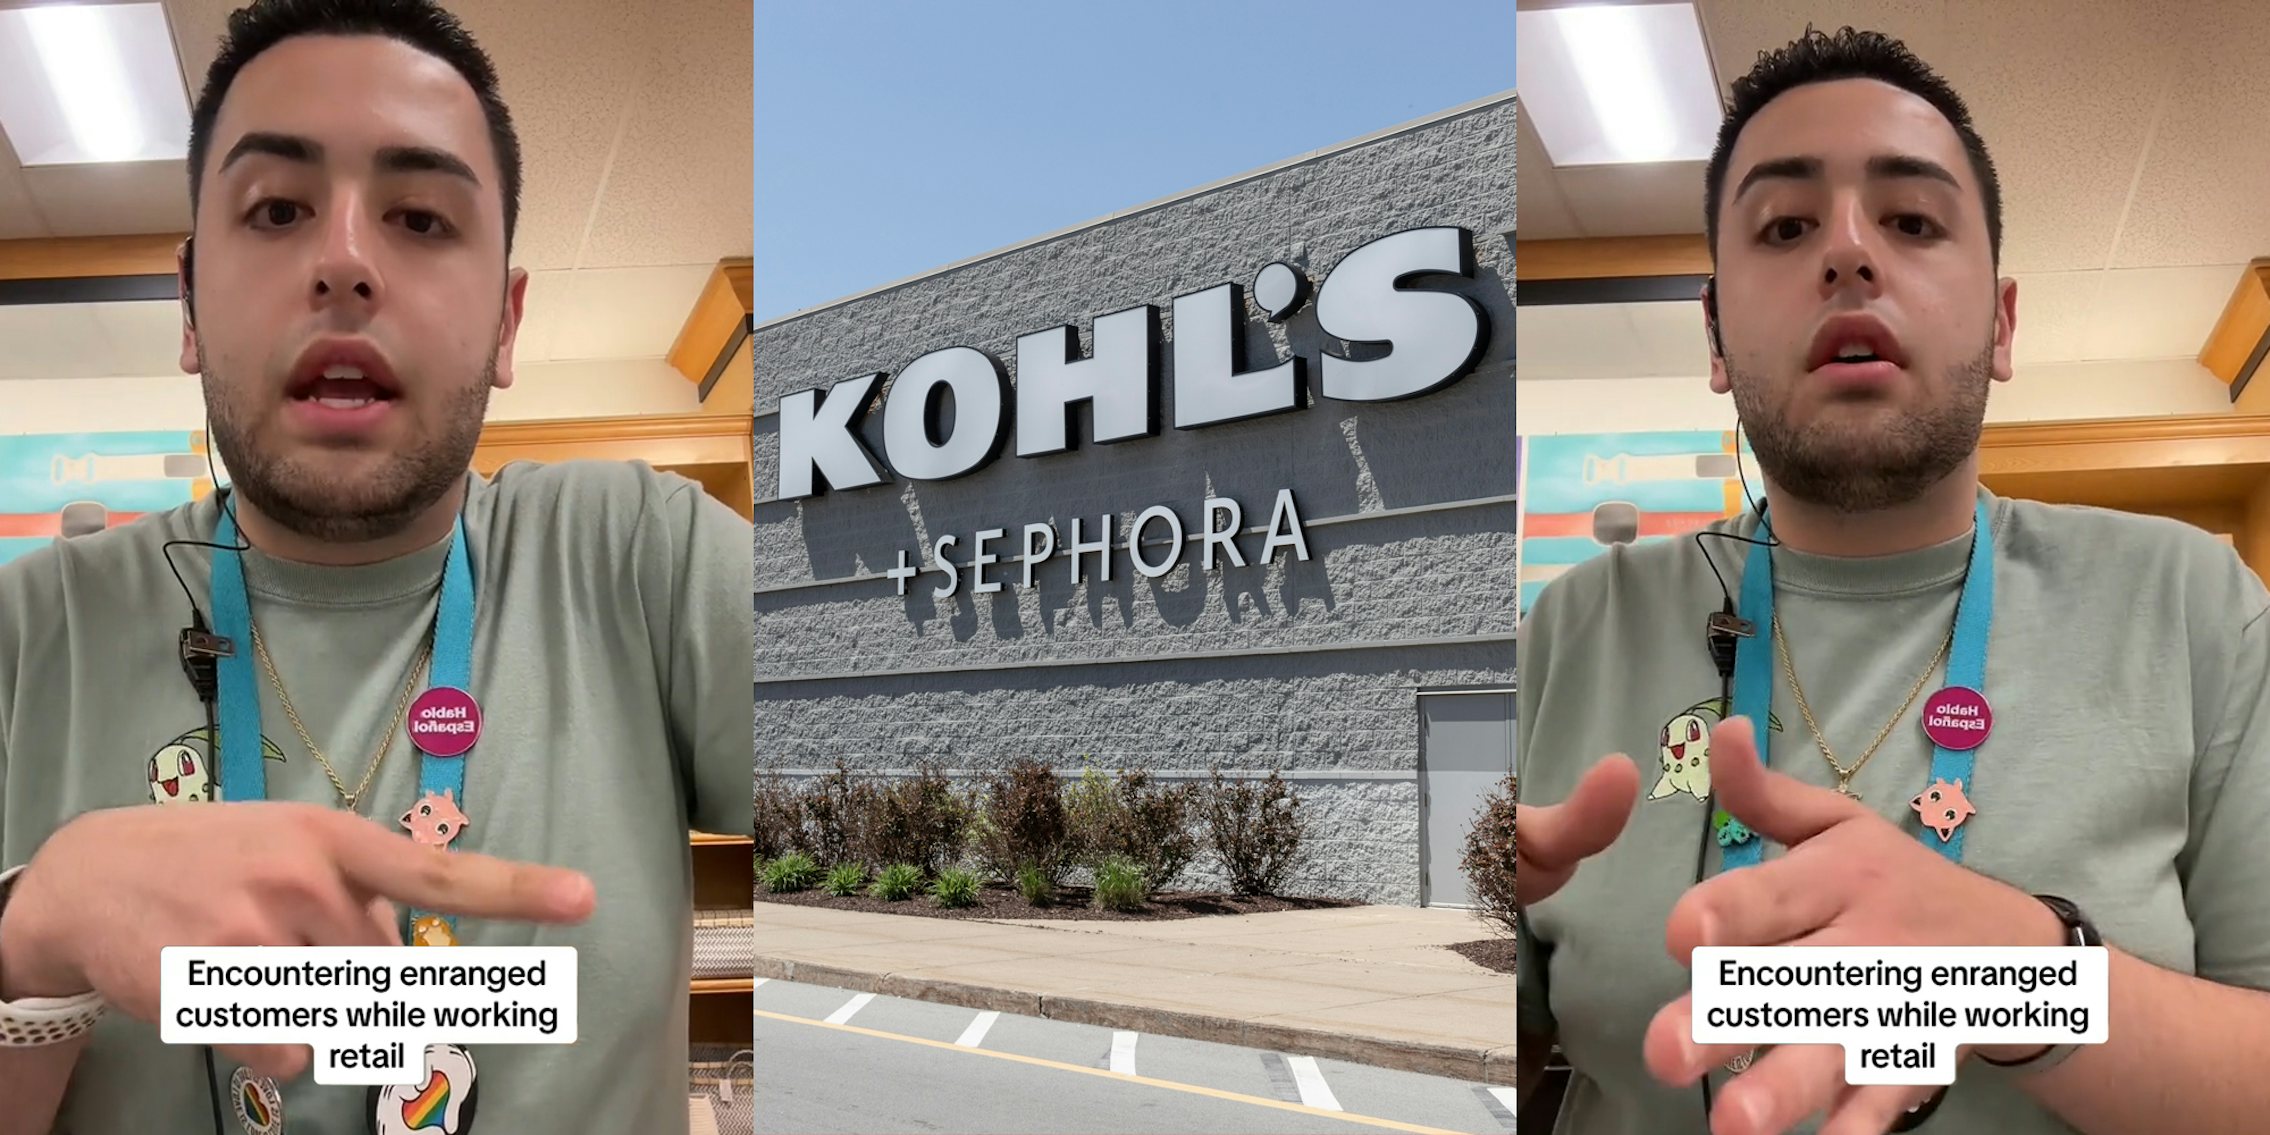 Kohl's worker speaking with caption 'Encountering enraged customers while working retail' (l) Kohl's building with sign (c) Kohl's worker speaking with caption 'Encountering enraged customers while working retail' (r)